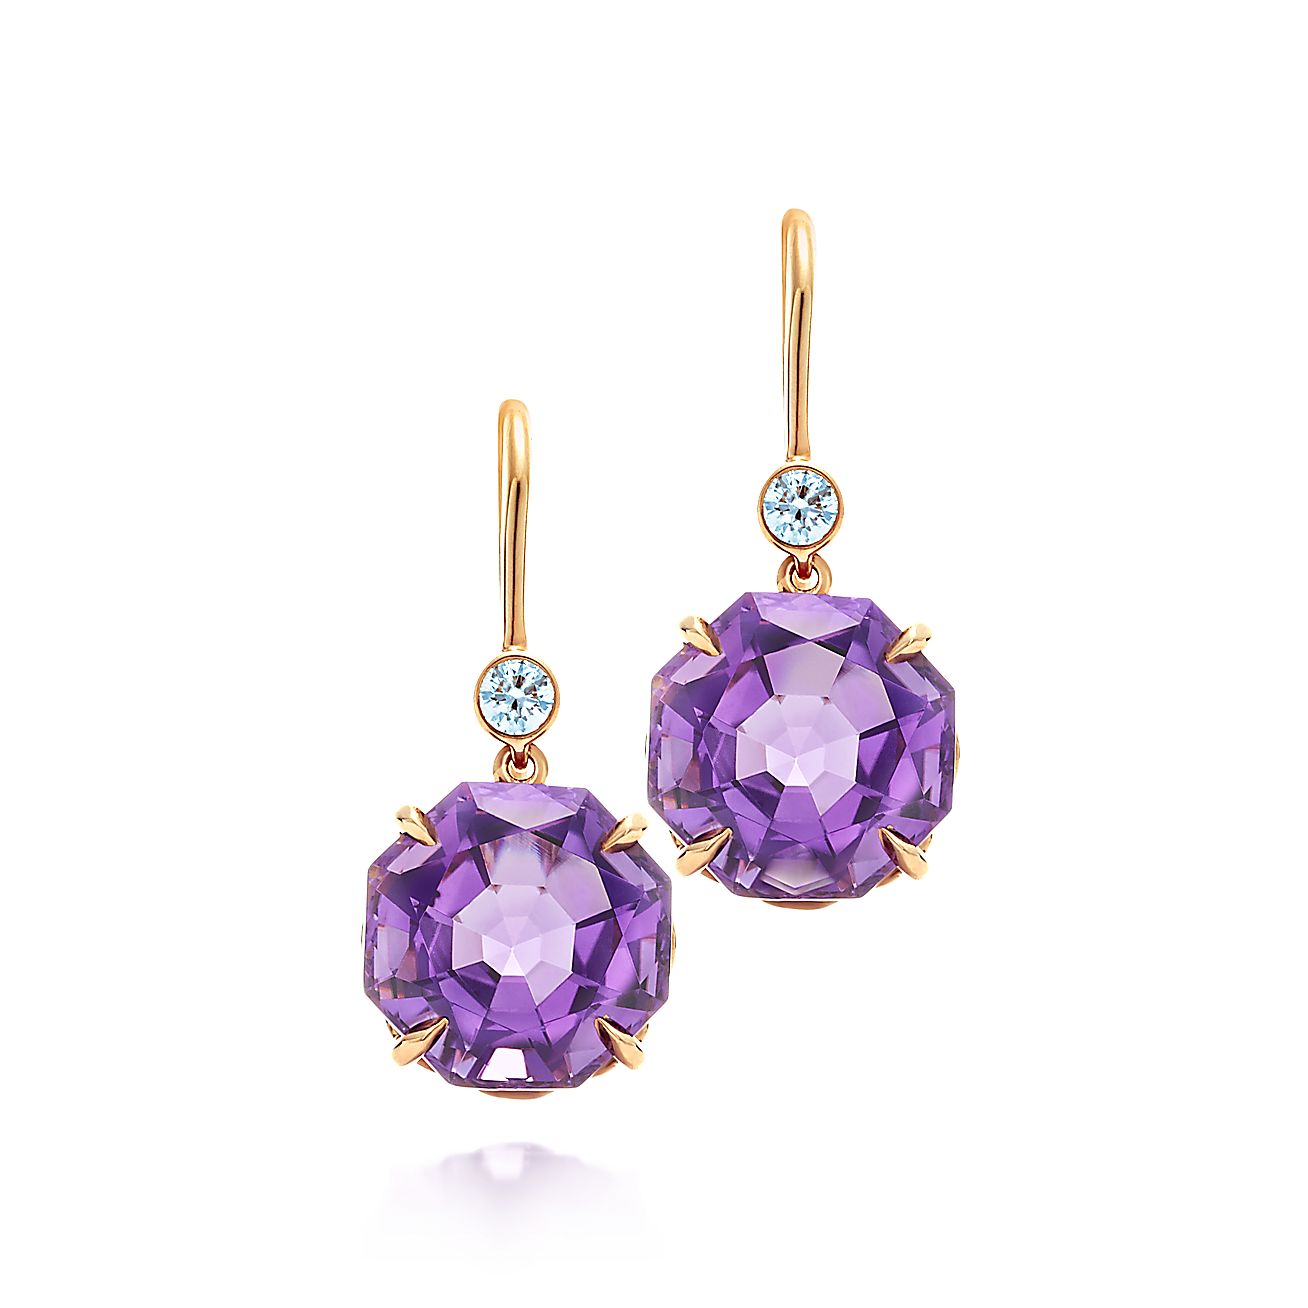 Tiffany Sparklers drop earrings in 18k rose gold with amethysts and ...